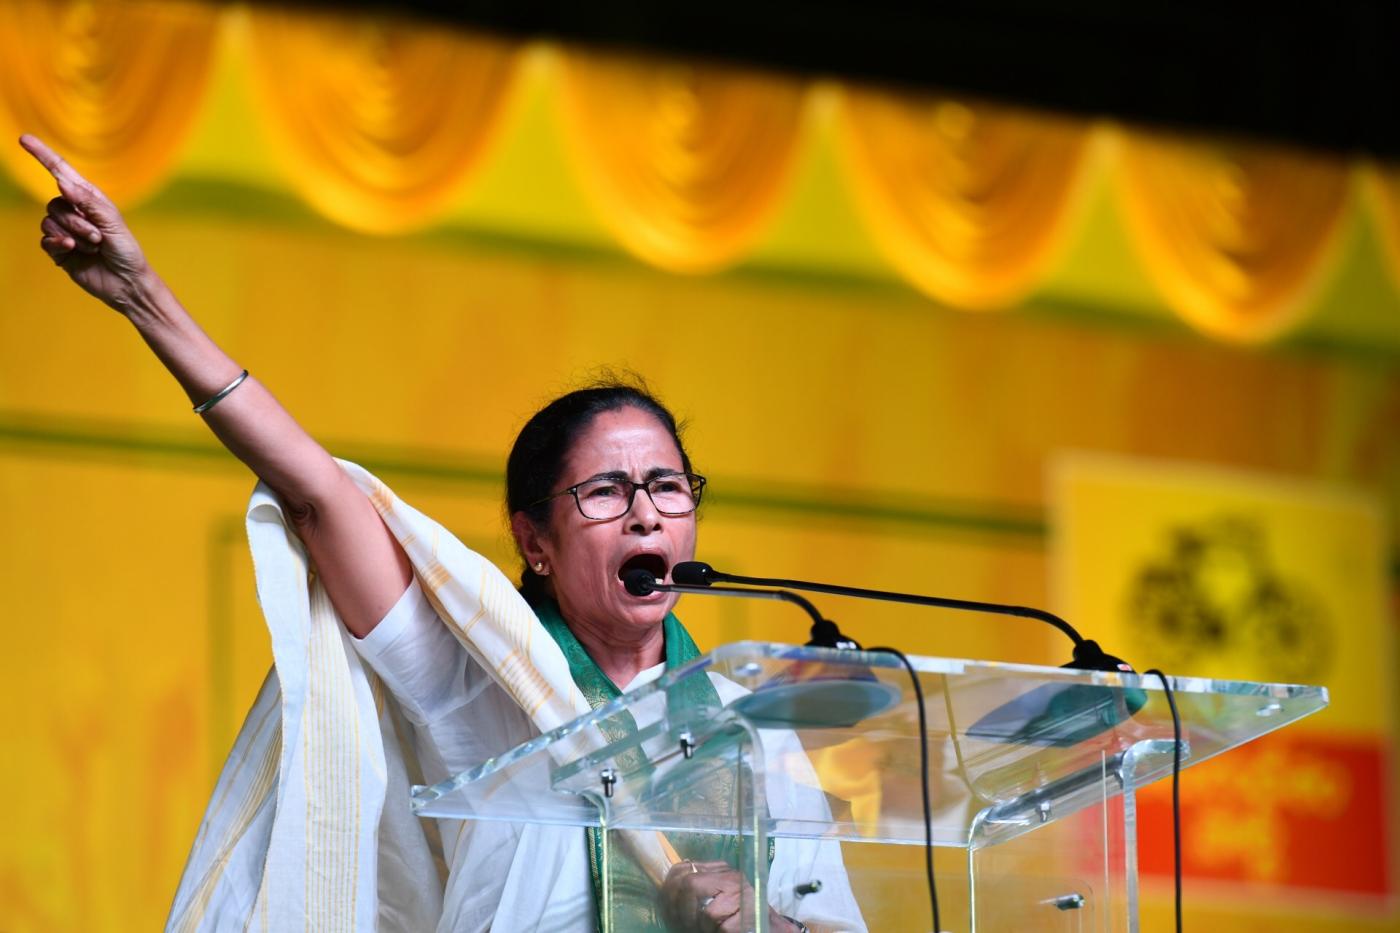 Visakhapatnam: West Bengal Chief Minister and Trinamool Congress supremo Mamata Banerjee addresses during a Telugu Desam Party's rally in Visakhapatnam on March 31, 2019. (Photo: IANS) by .